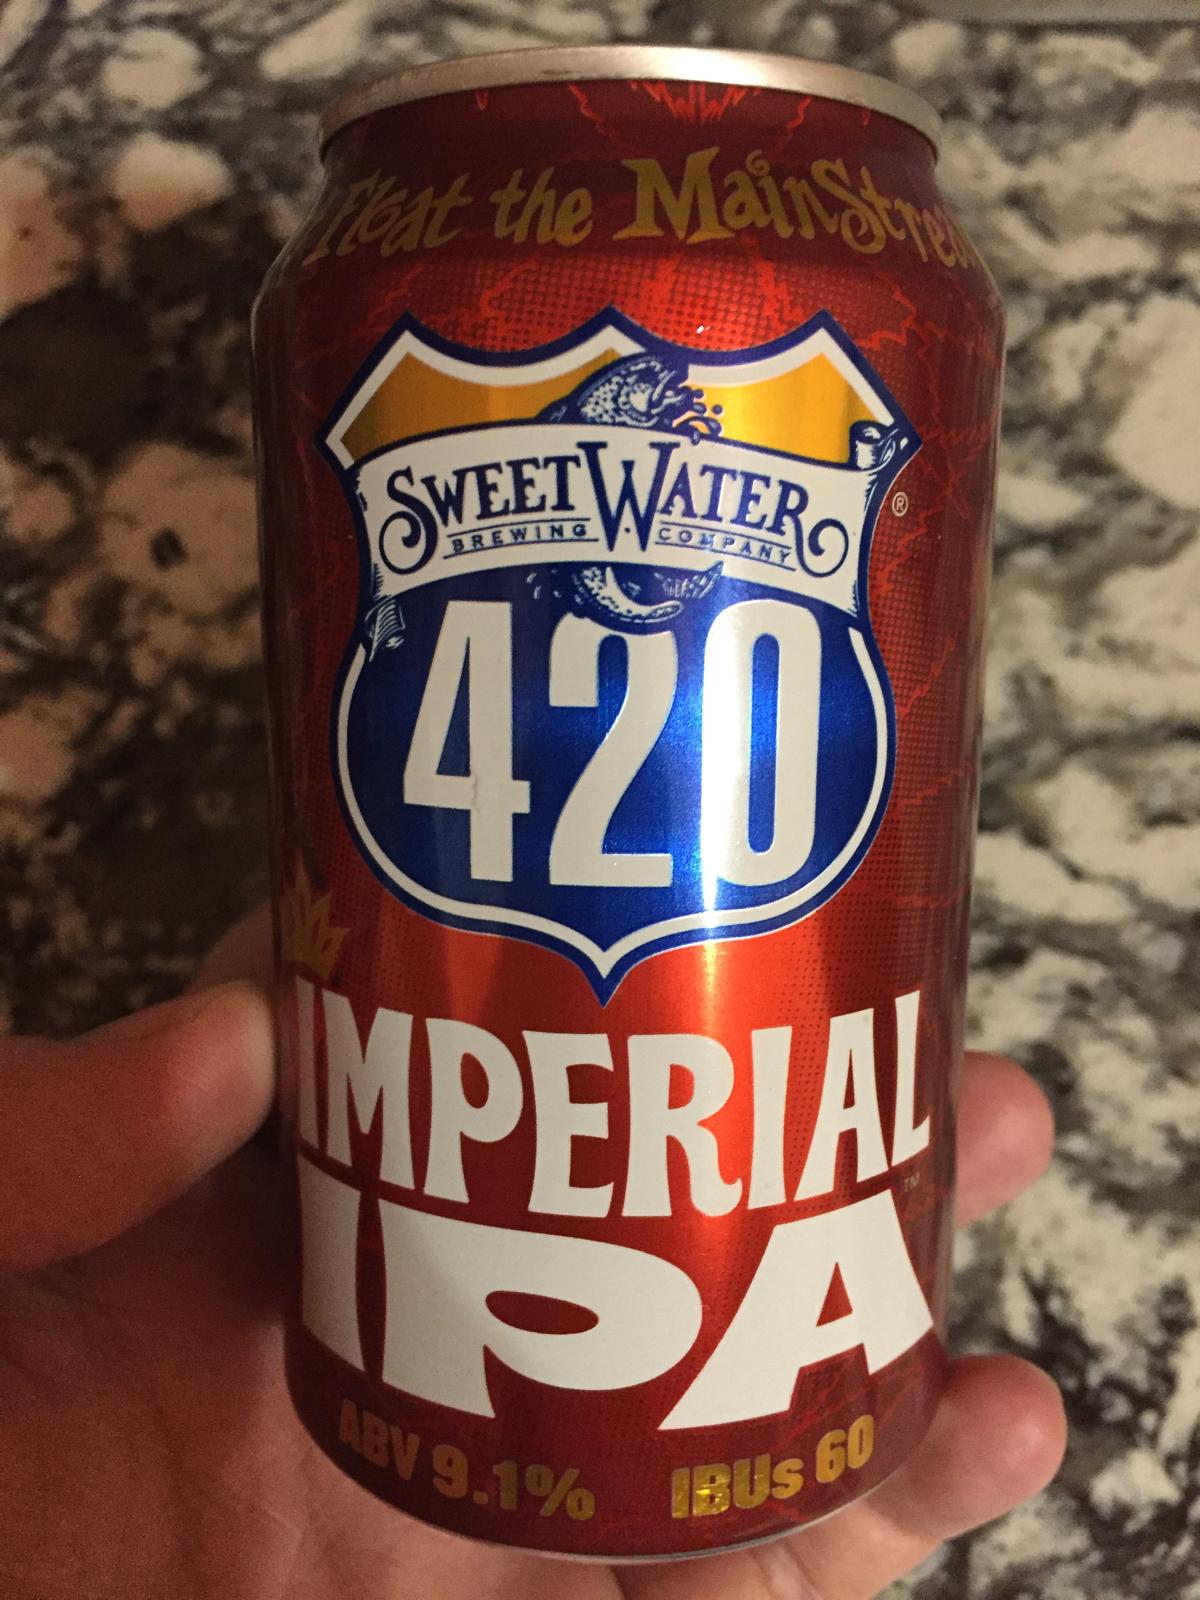 420 Imperial IPA